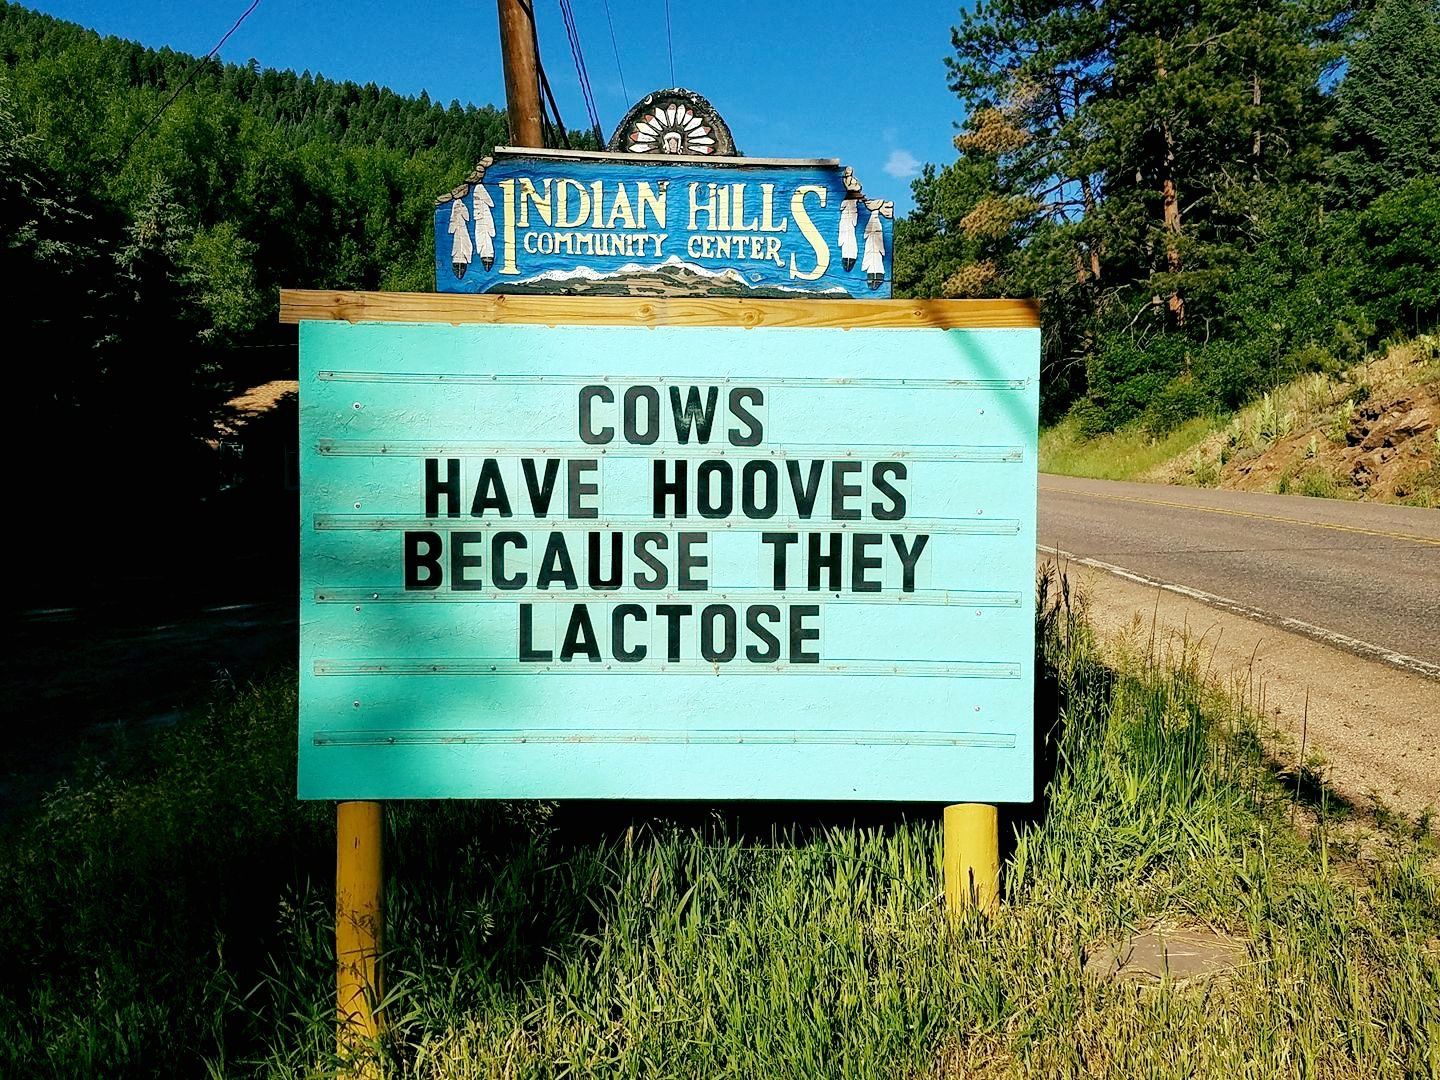 Cows lack toes